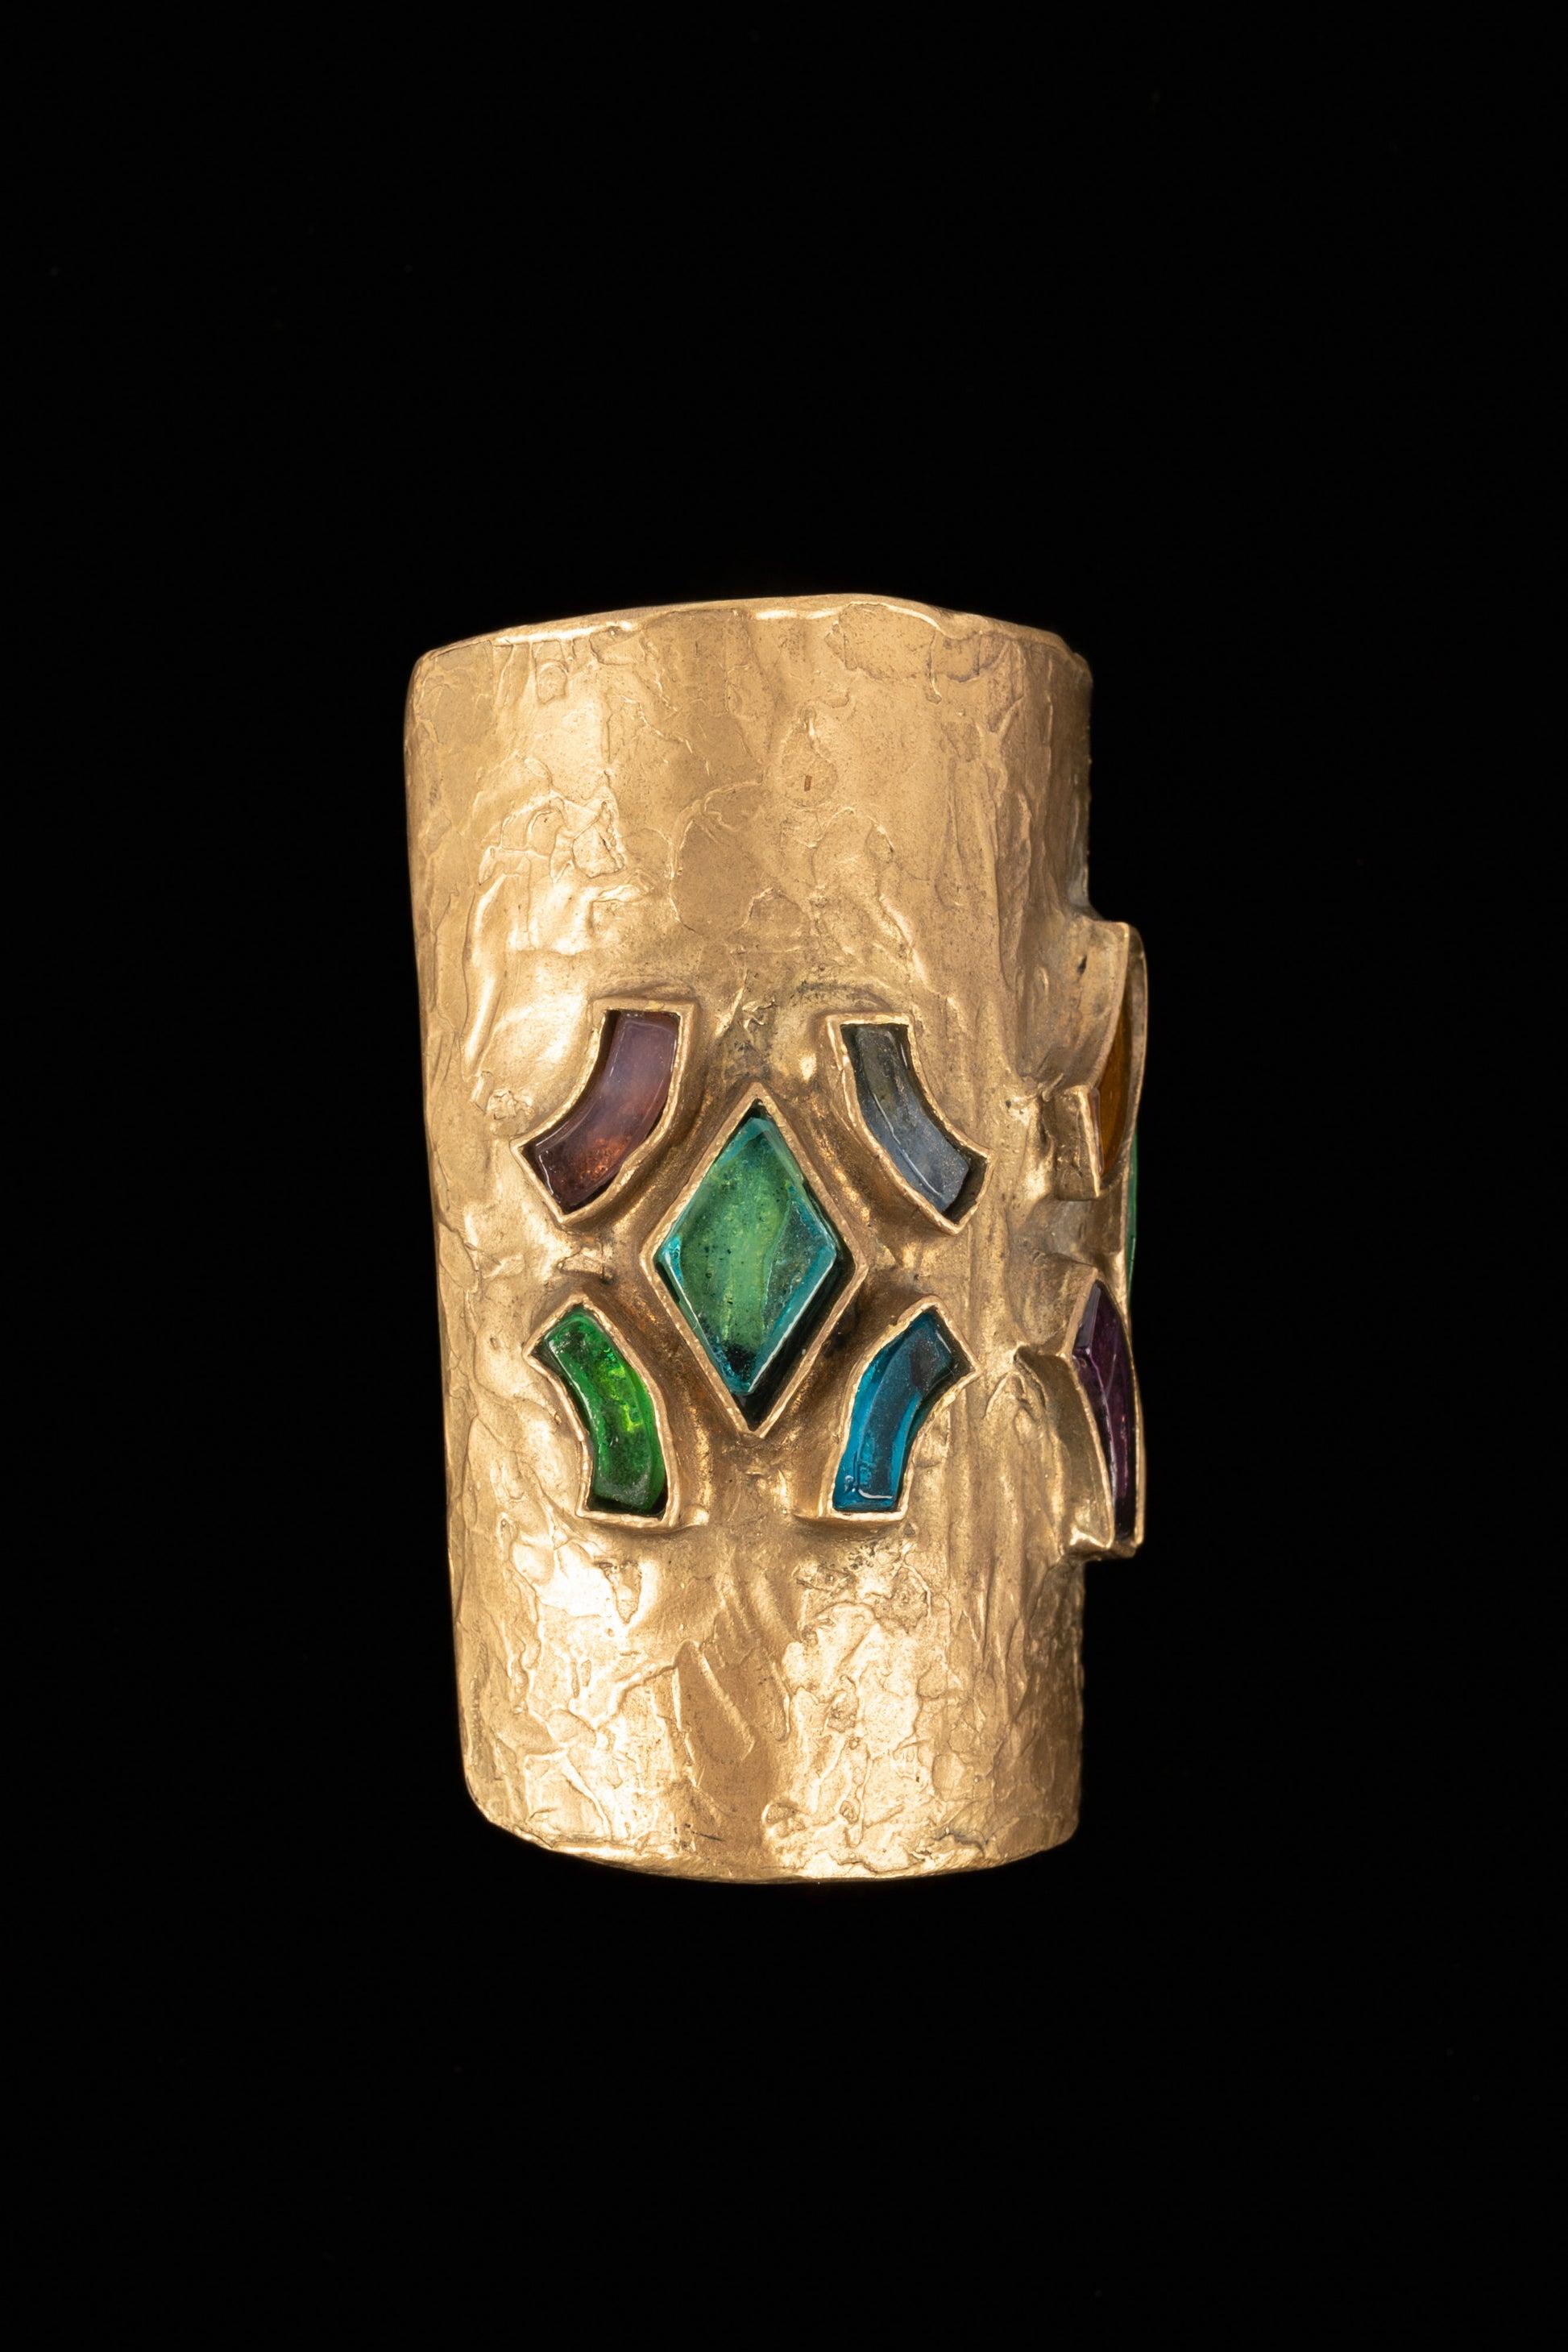 Chanel - Beaten golden metal cuff bracelet with multicolored glass paste. Goossens Atelier for the House of Chanel.
 
 Additional information: 
 Condition: Very good condition
 Dimensions: Wrist circumference: 11 cm - Length: 8 cm - Opening: 3.5 cm
